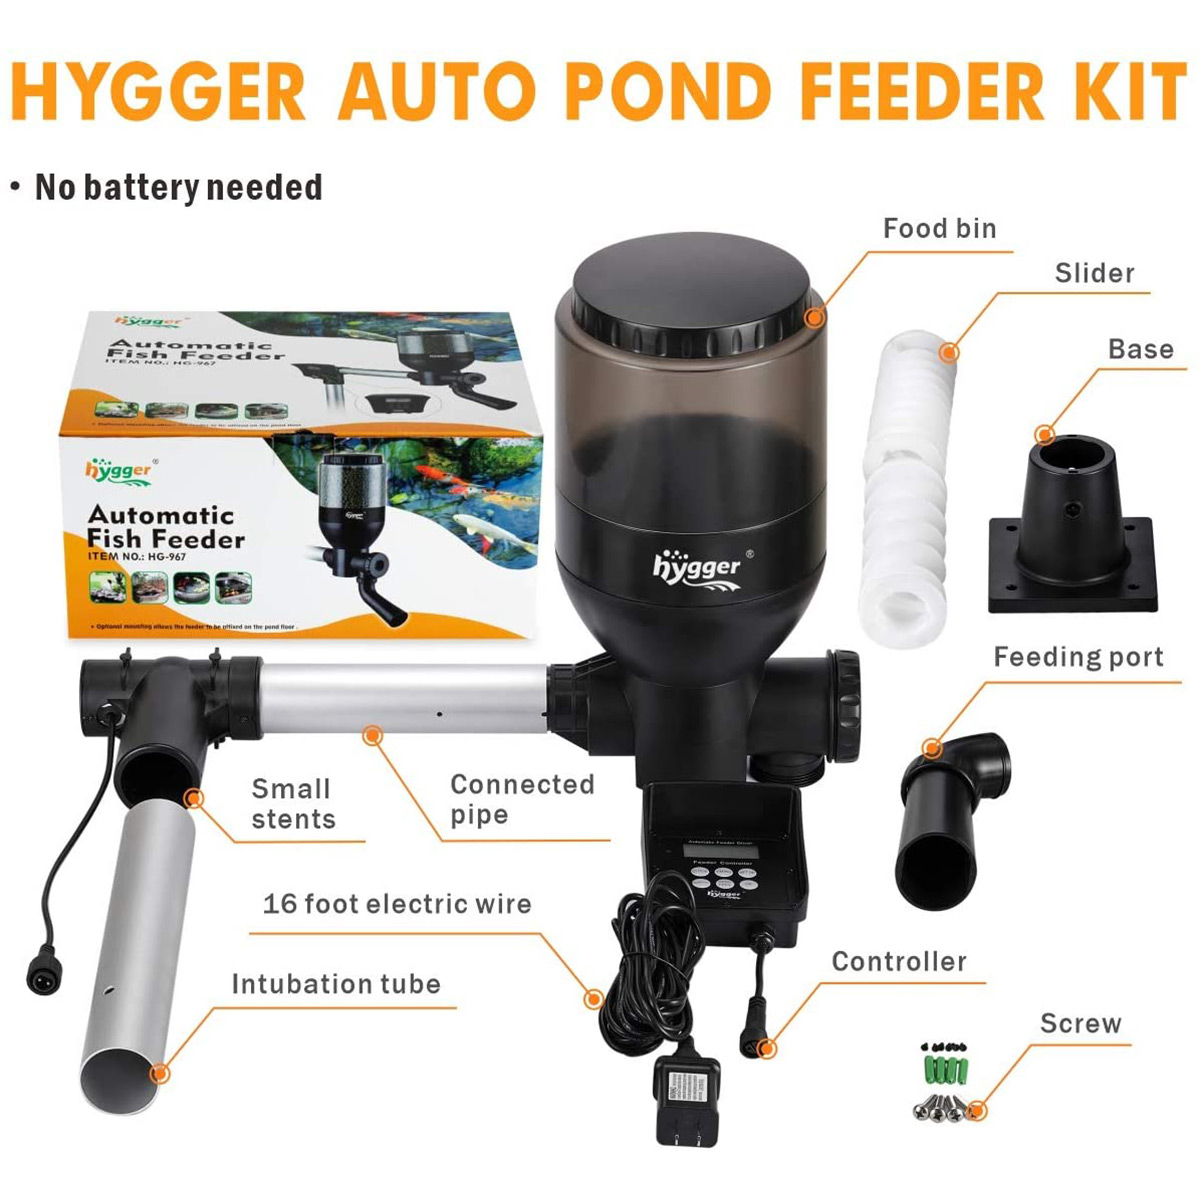 fish feed and grow - hygger